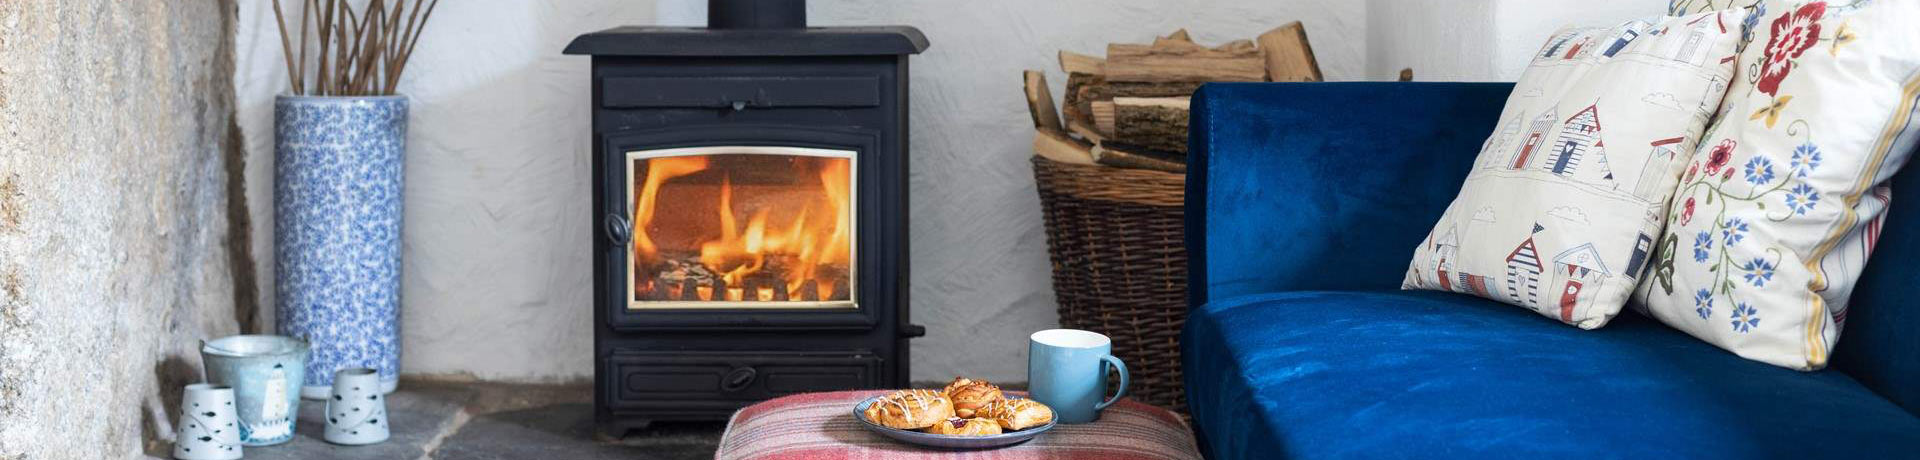 Best cosy holiday cottages with a wood-burner